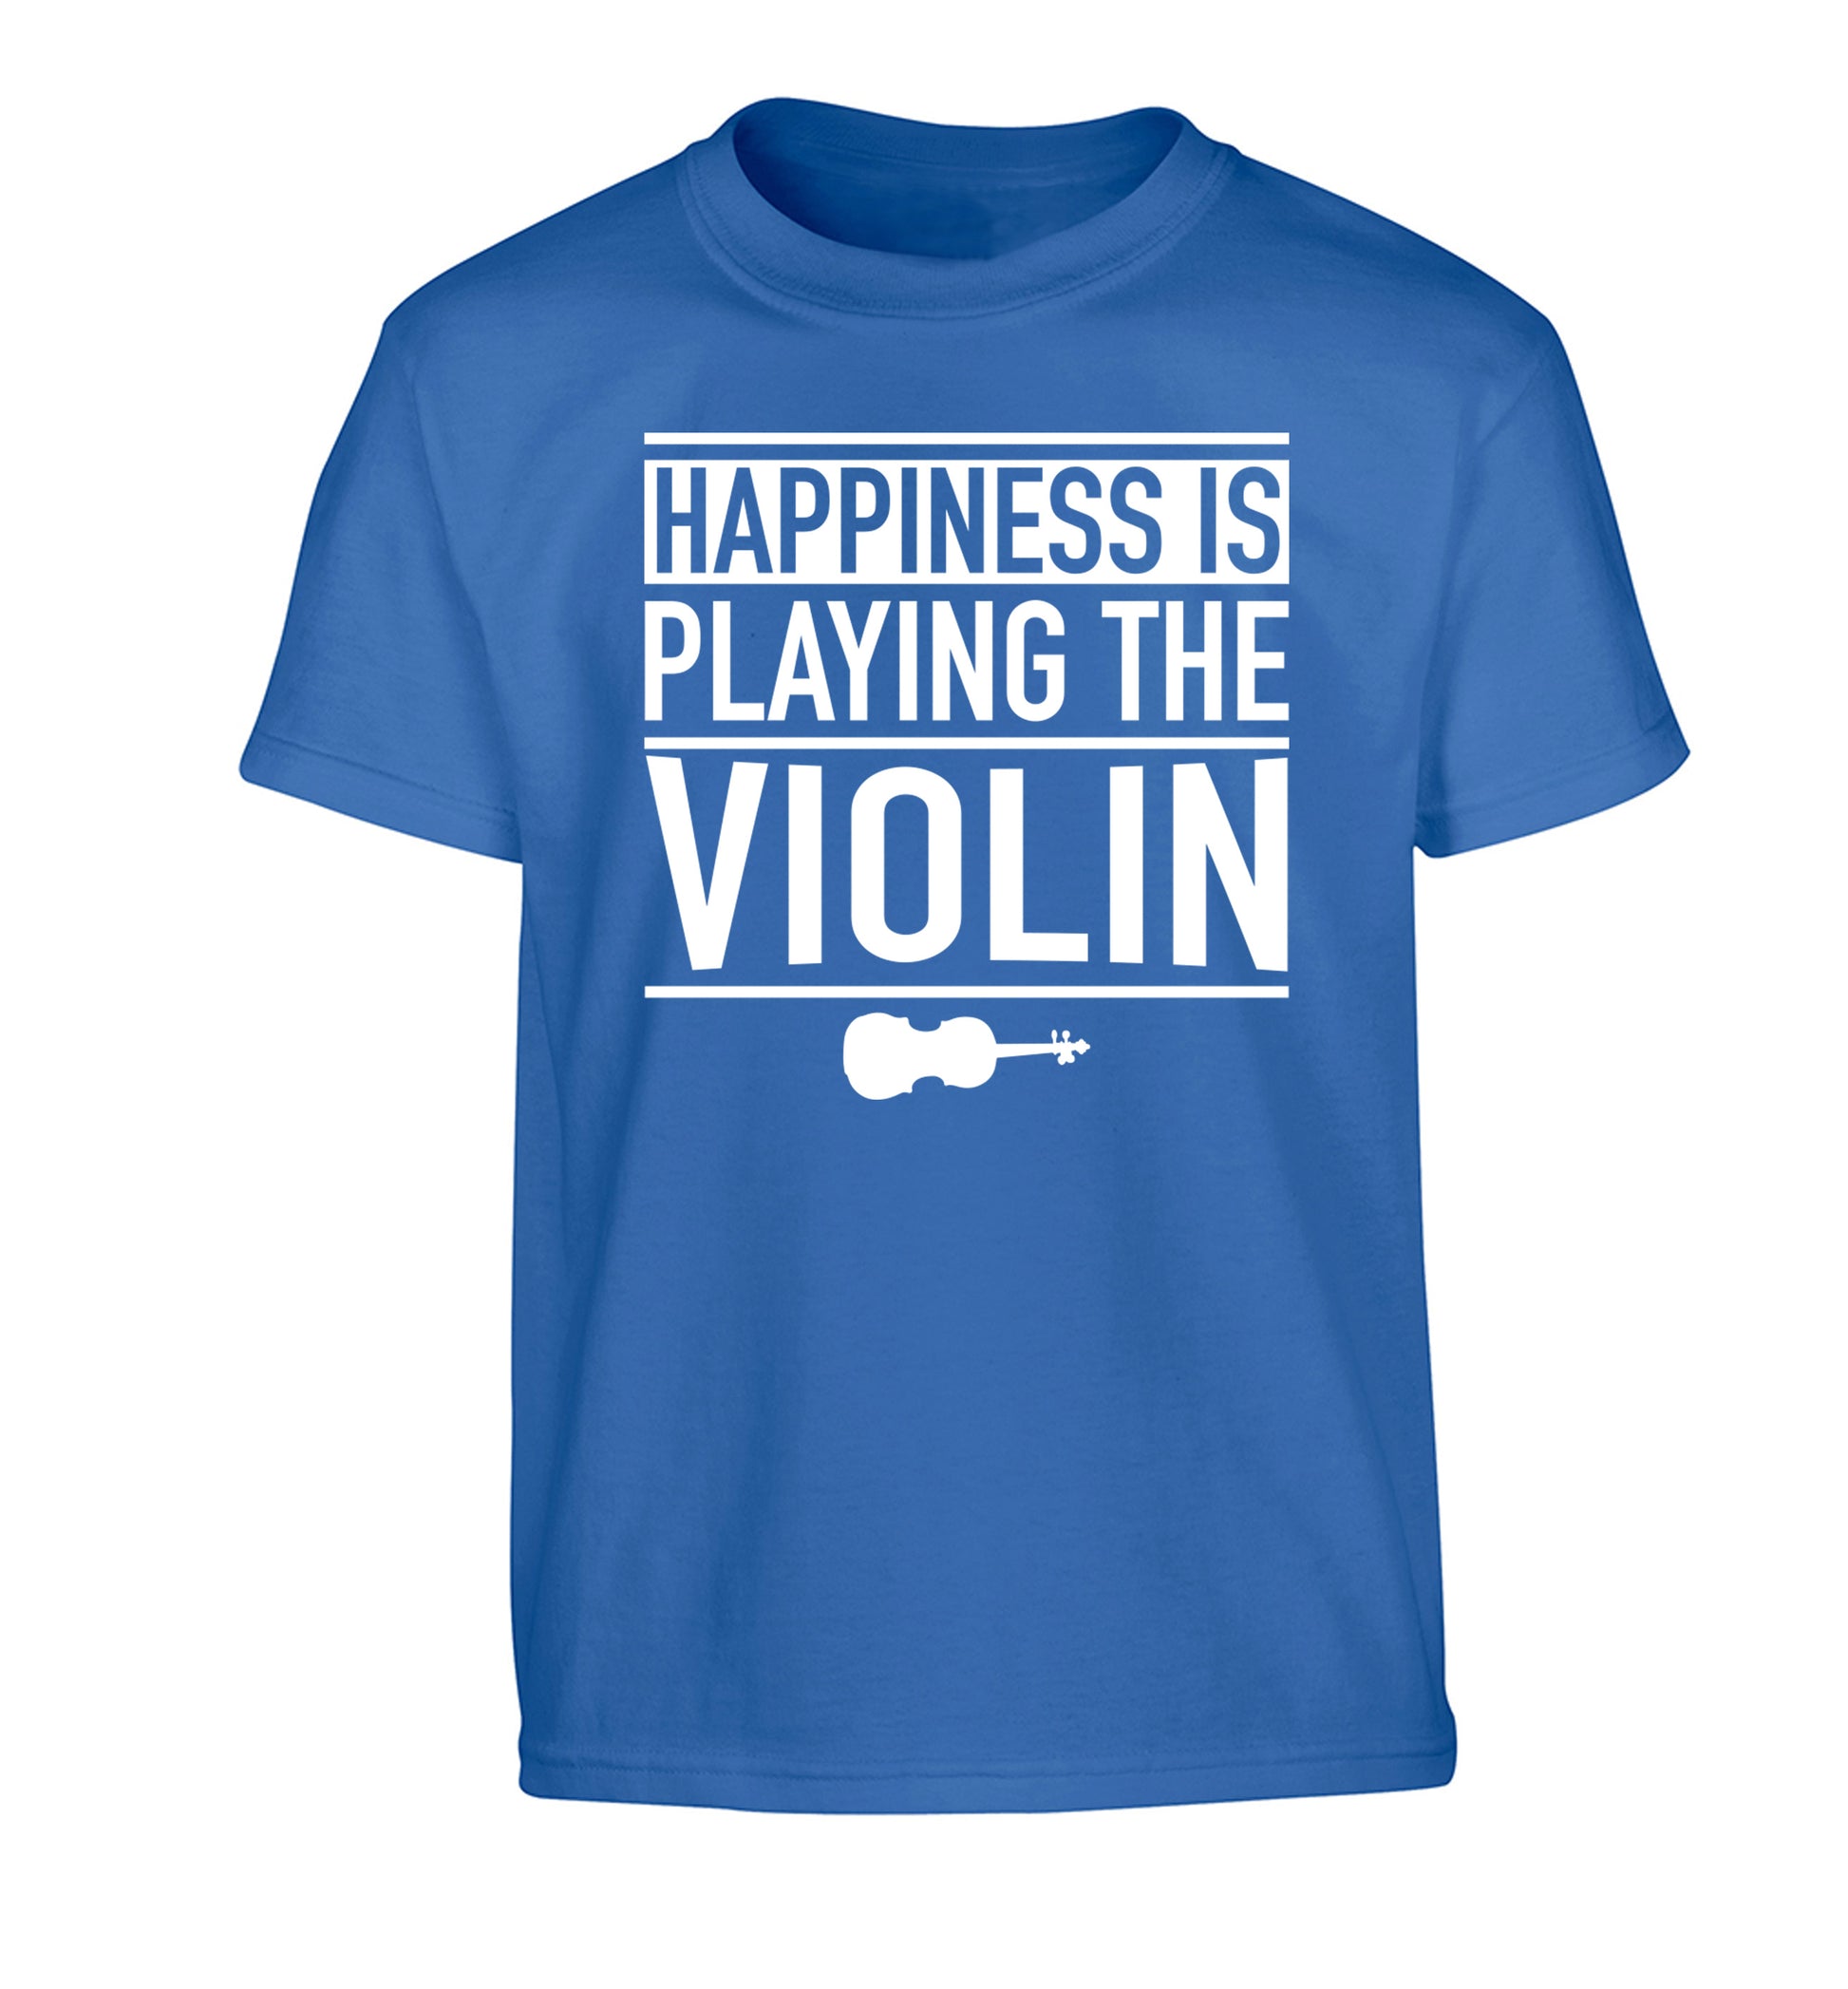 Happiness is playing the violin Children's blue Tshirt 12-13 Years